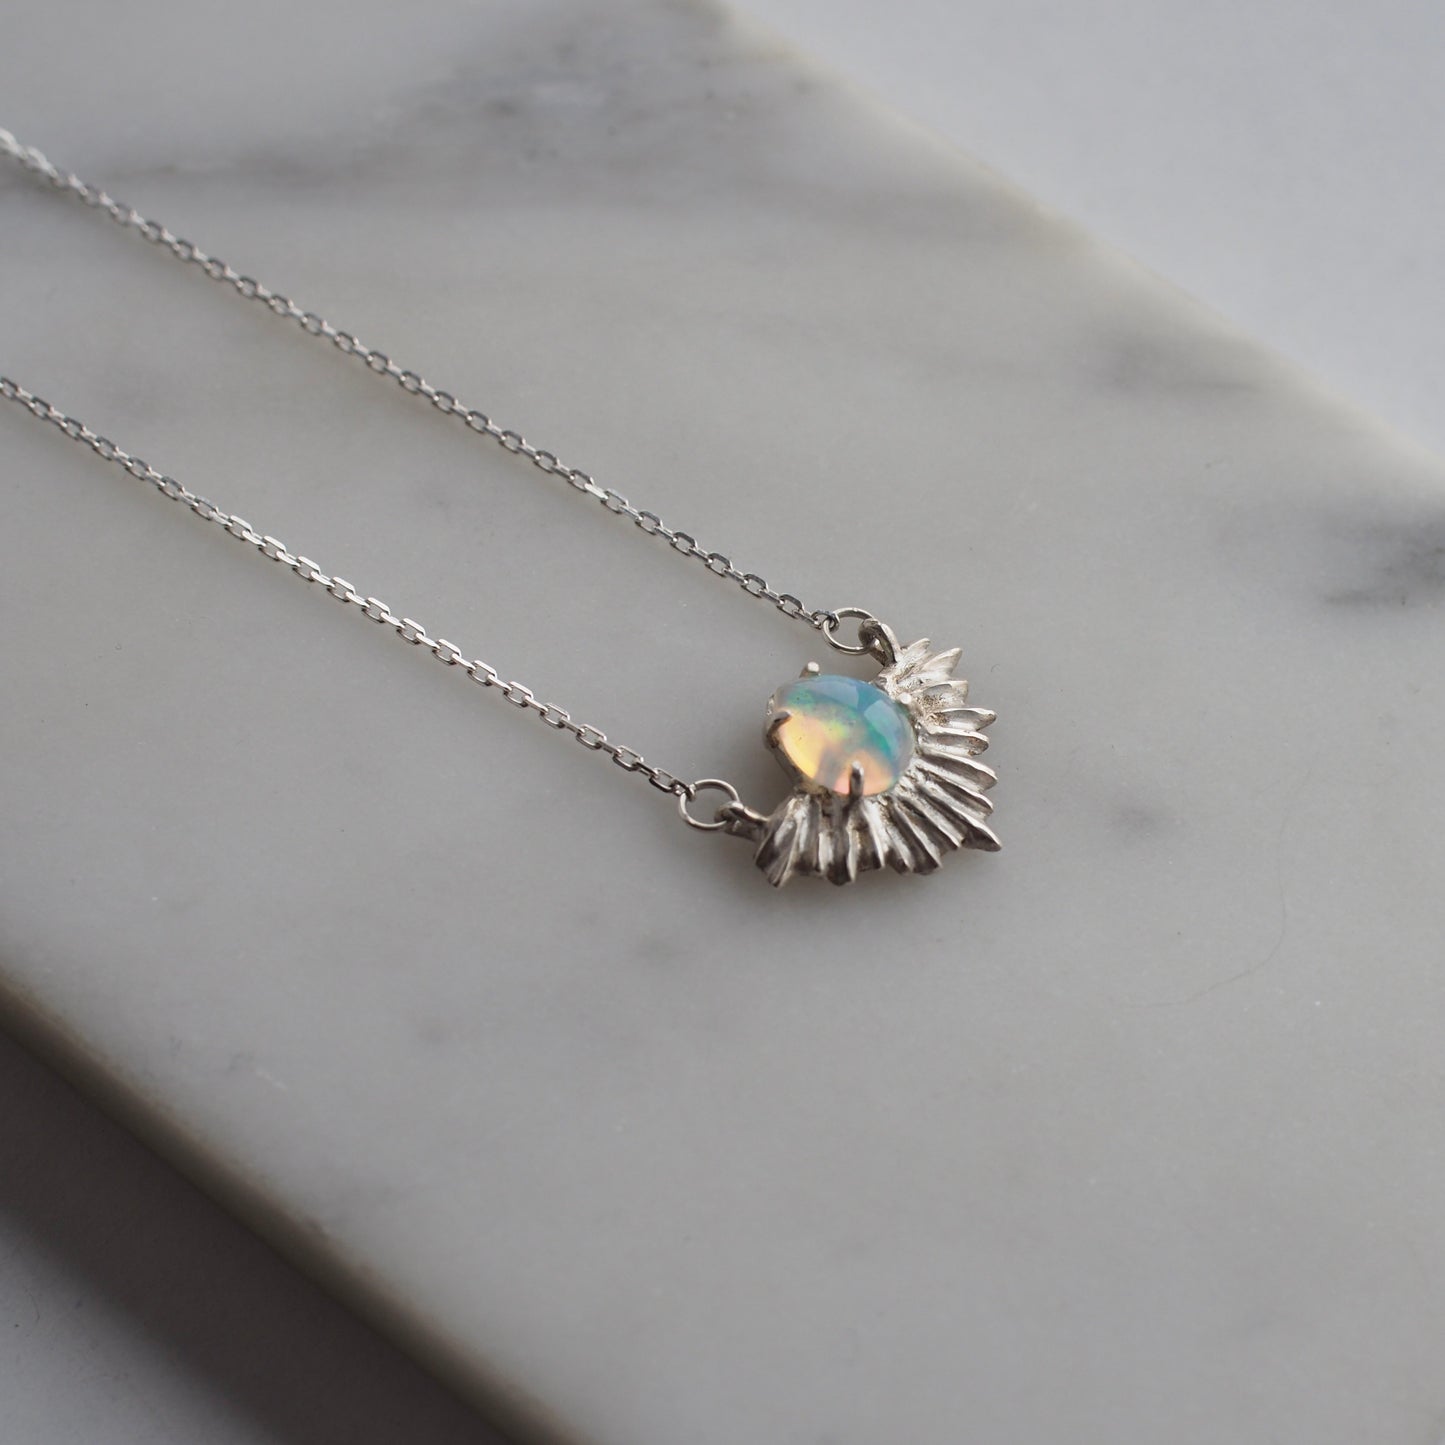 Silver Boundless Light Opal Necklace - Last One!